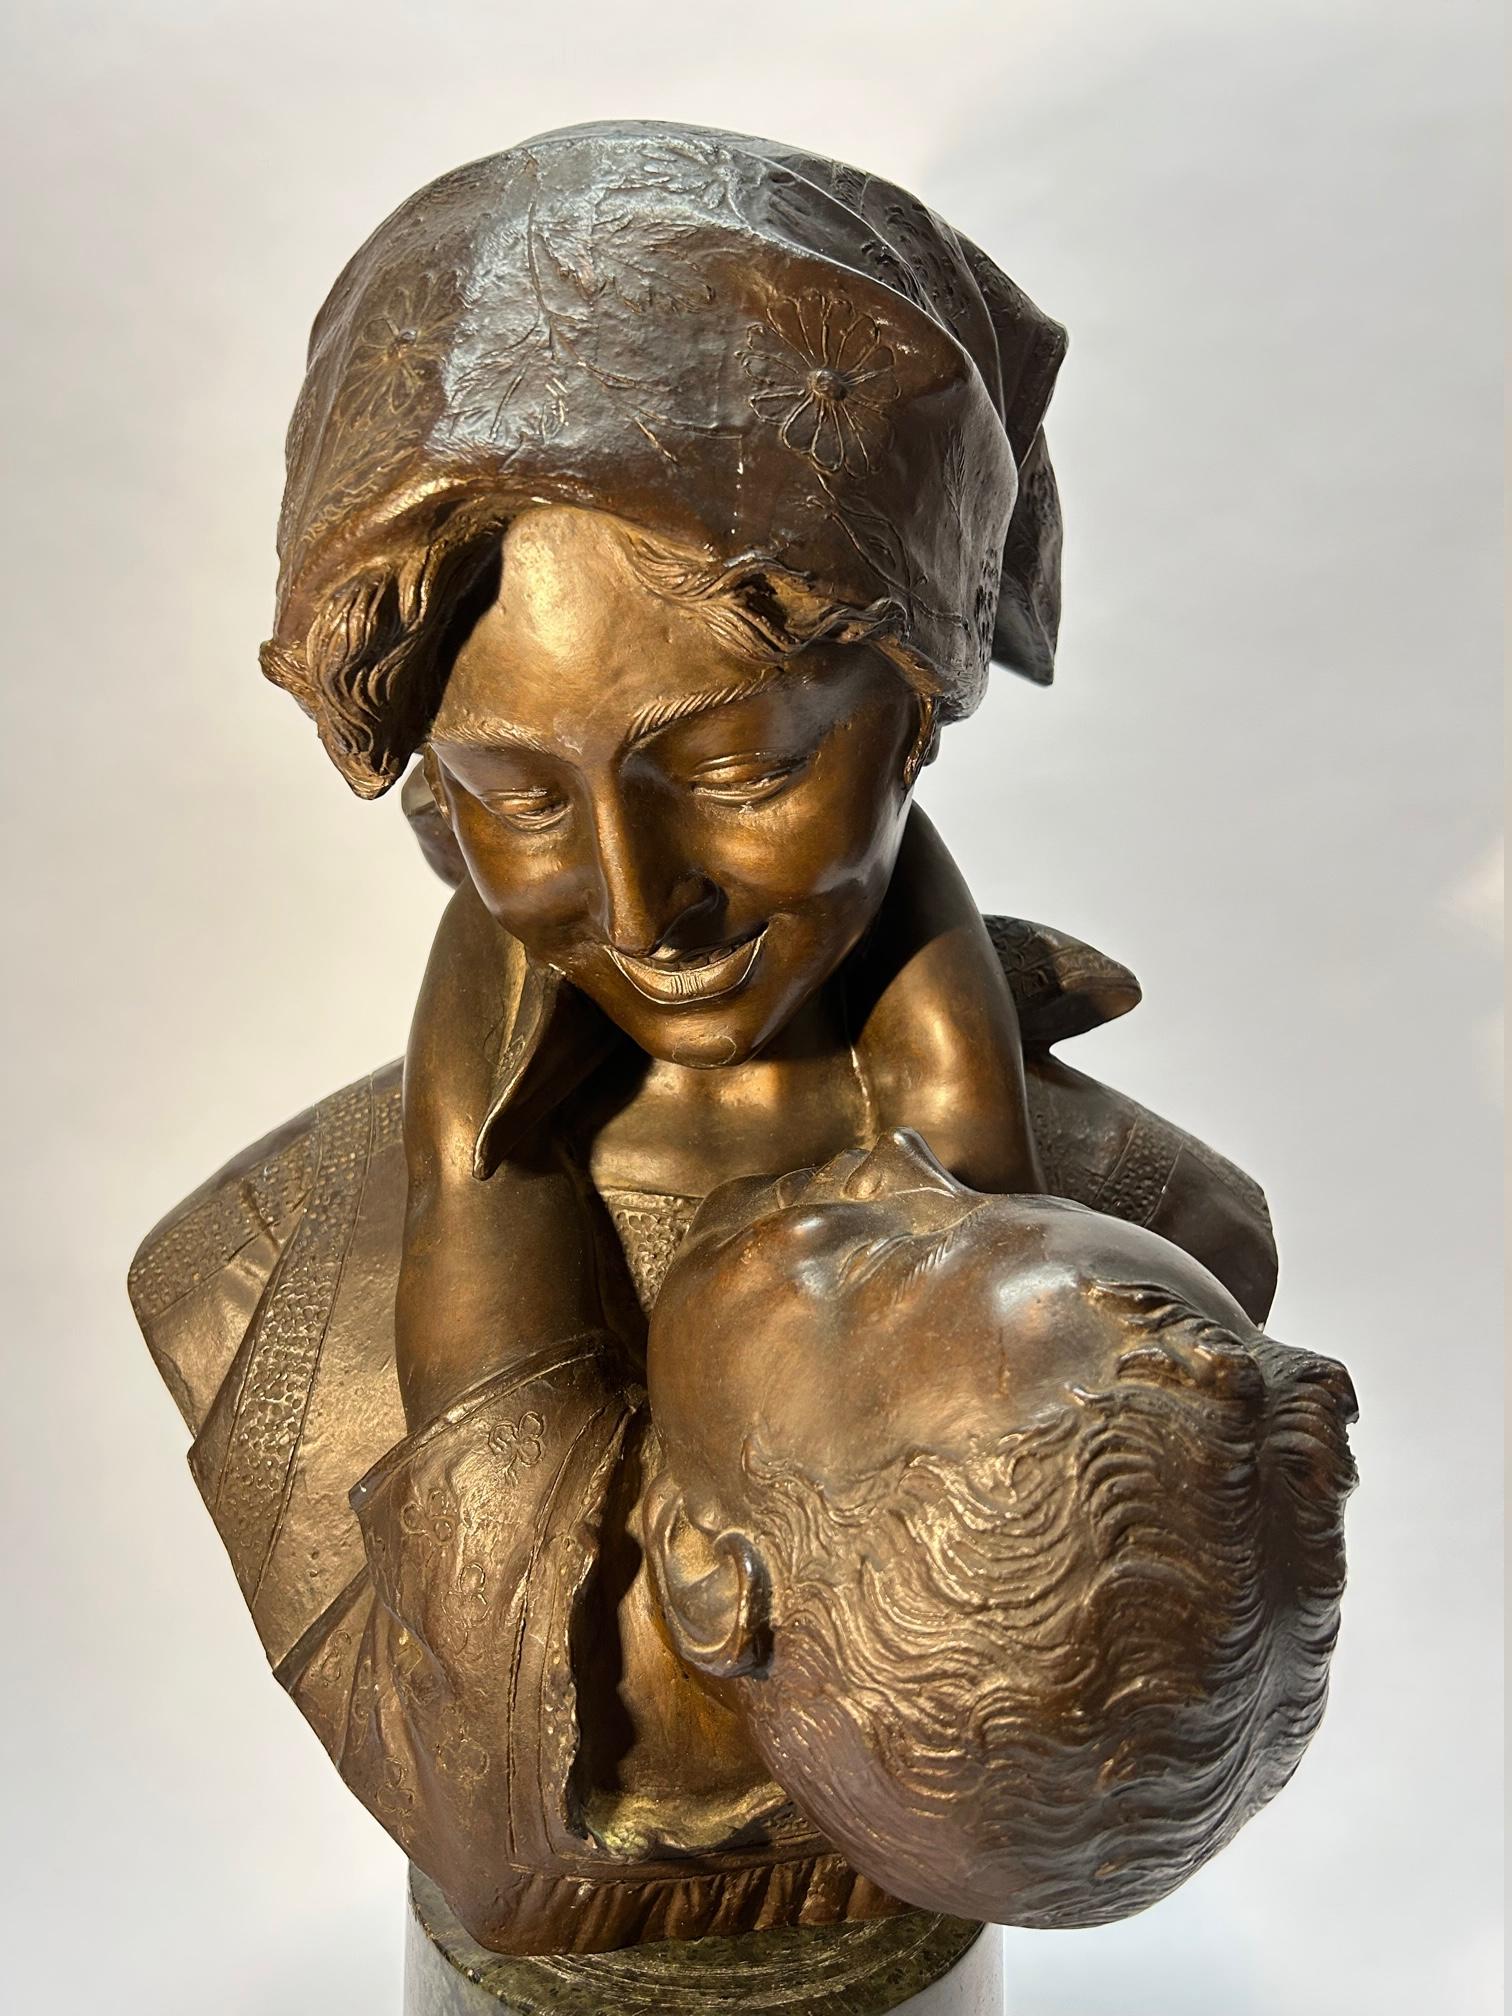 Beautiful signed, Auguste Moreau, statue of mother and child.

He is credited as one of the most important representatives of Art Nouveau, with ornate realistic and highly detailed sculptures. His work was first exhibited at the Paris Salon (